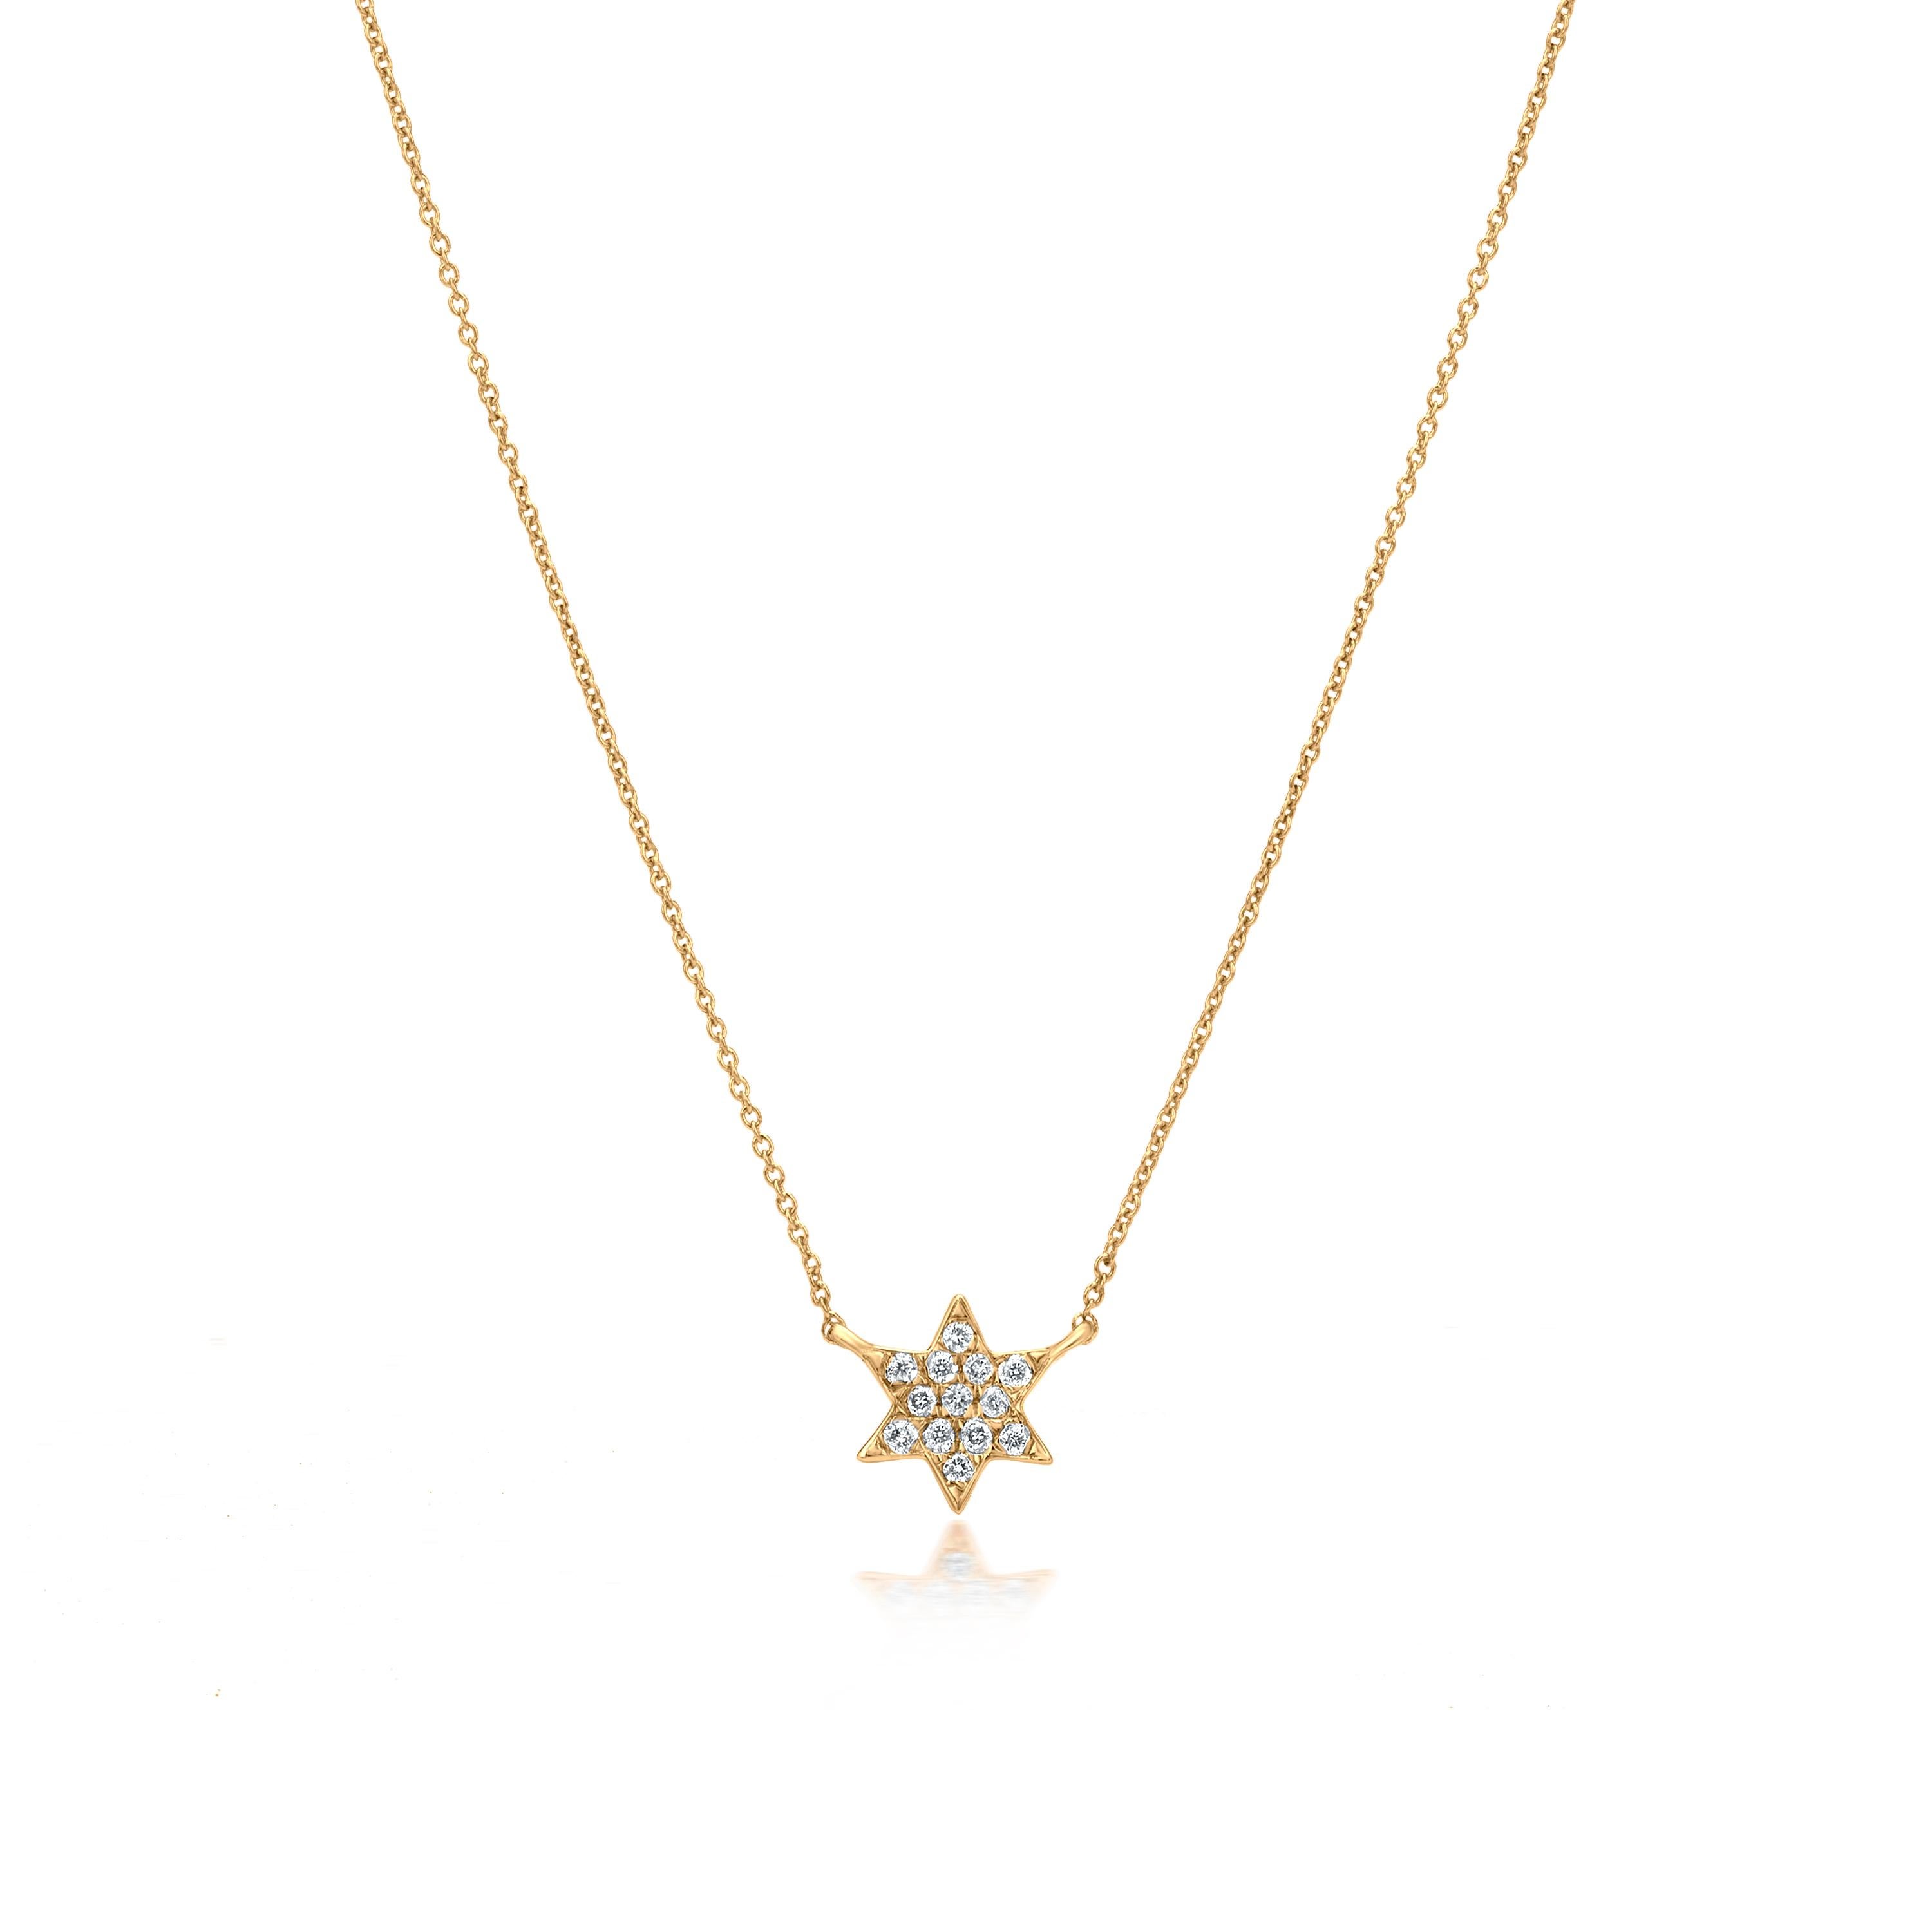 Grace your neckline with a Luxle star pendant a representative of guidance, leading the direction you were meant to go. Subtle yet pretty this star pendant necklace is the new fashion statement. This gorgeous necklace is featured with 13 round cut